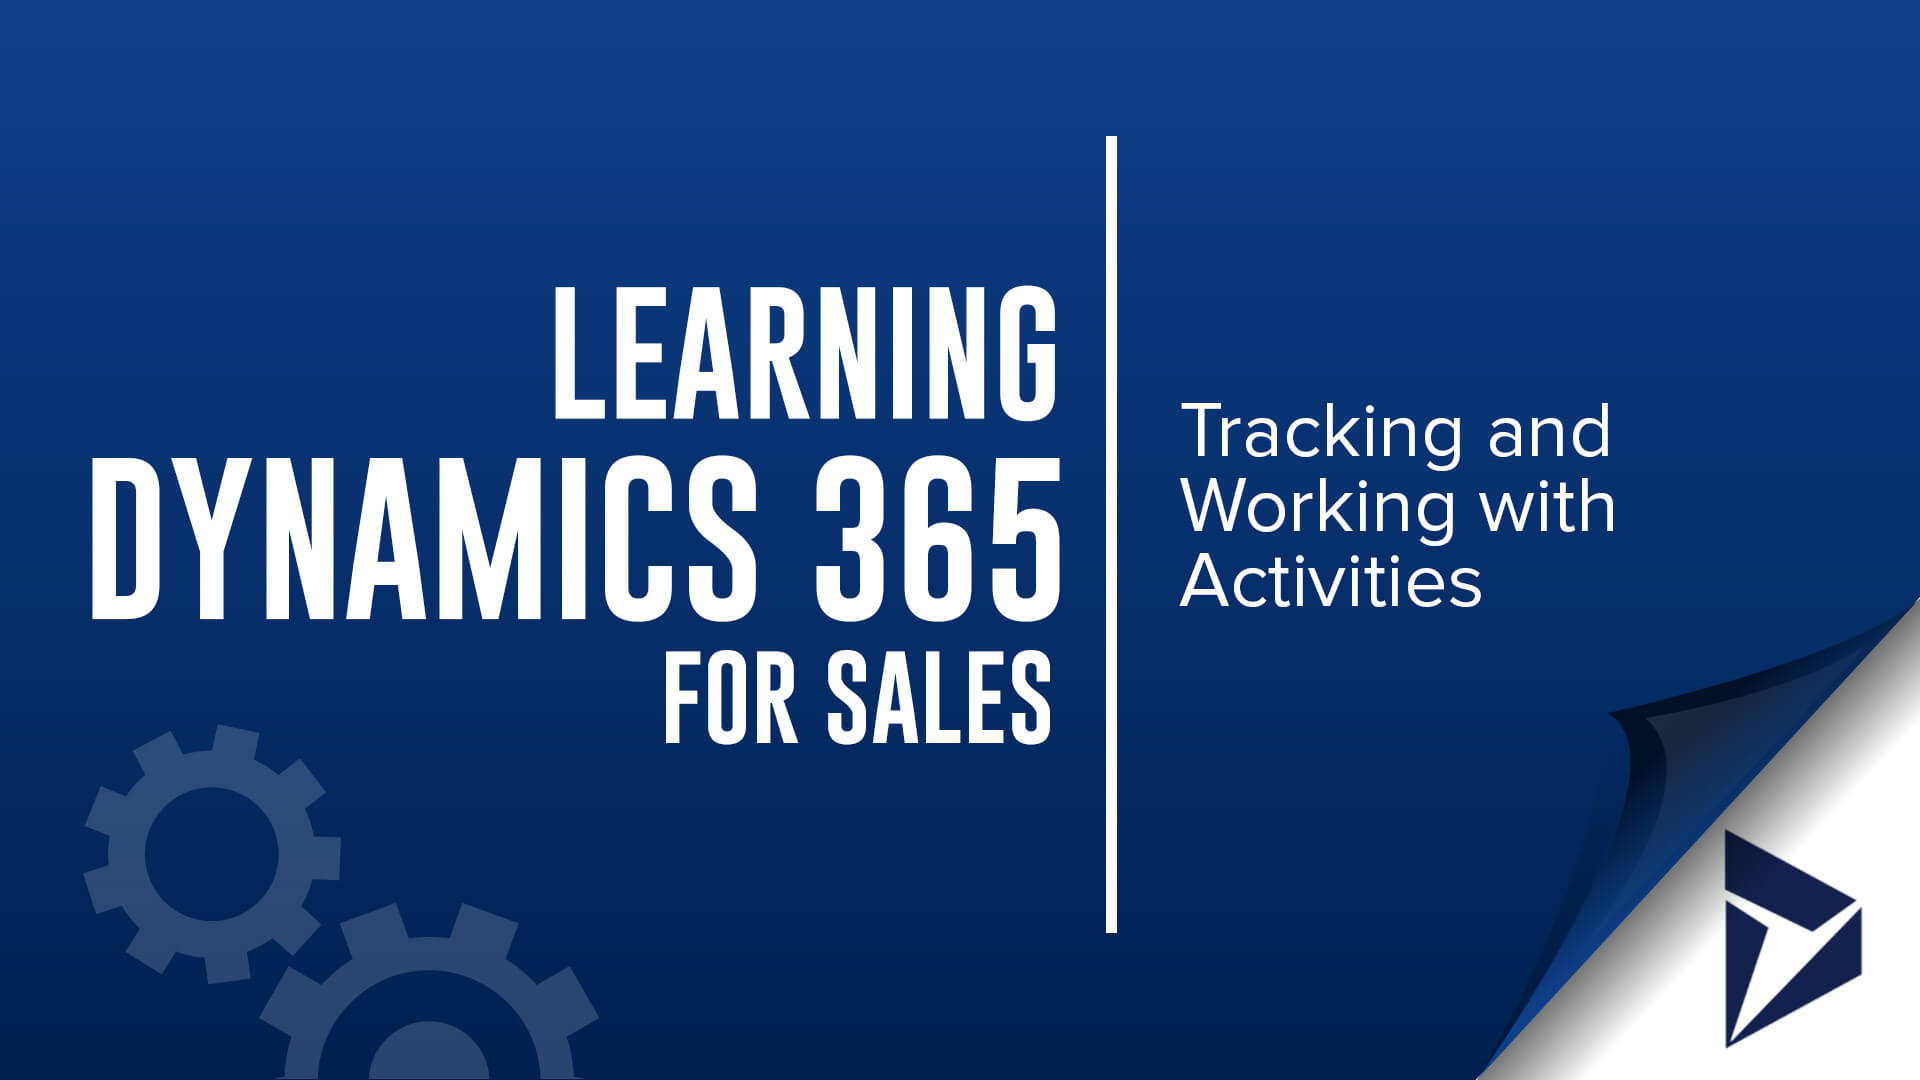 learning Dynamics 365 for Sales - tracking and working with activities